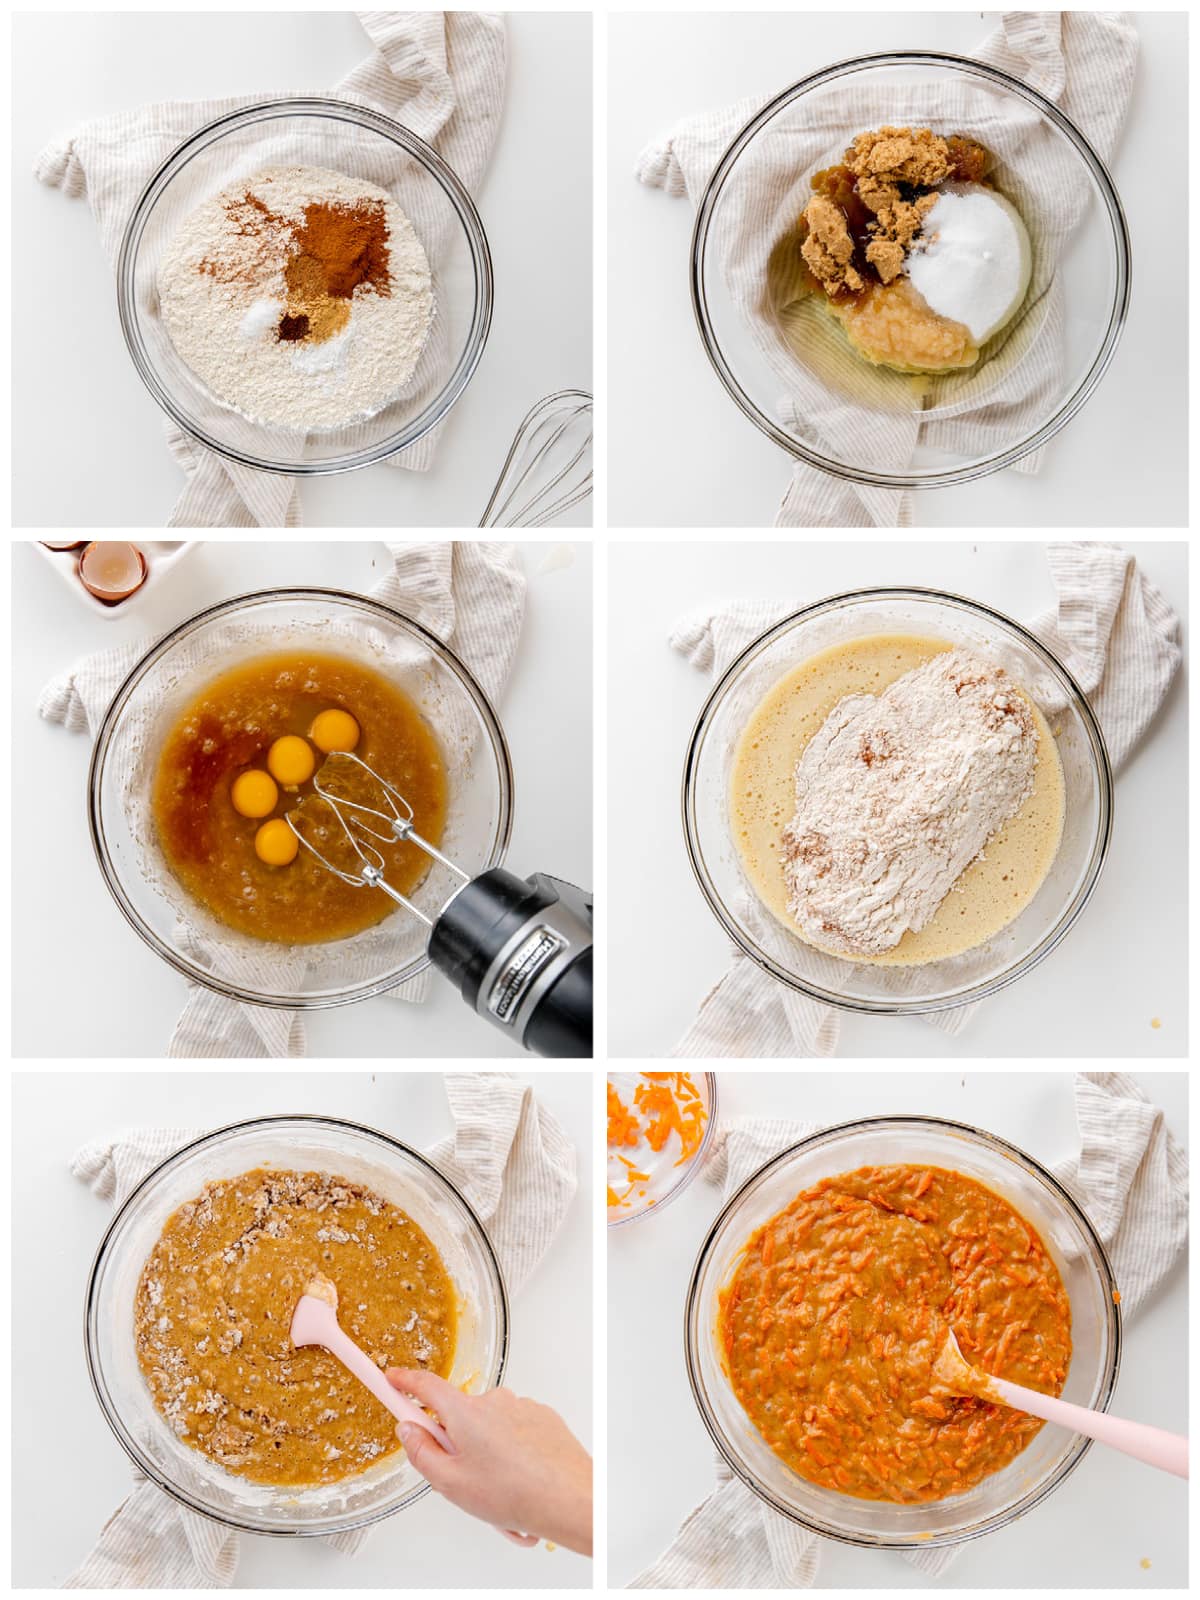 photo collage demonstrating how to make carrot cake batter in a mixing bowl with a hand mixer